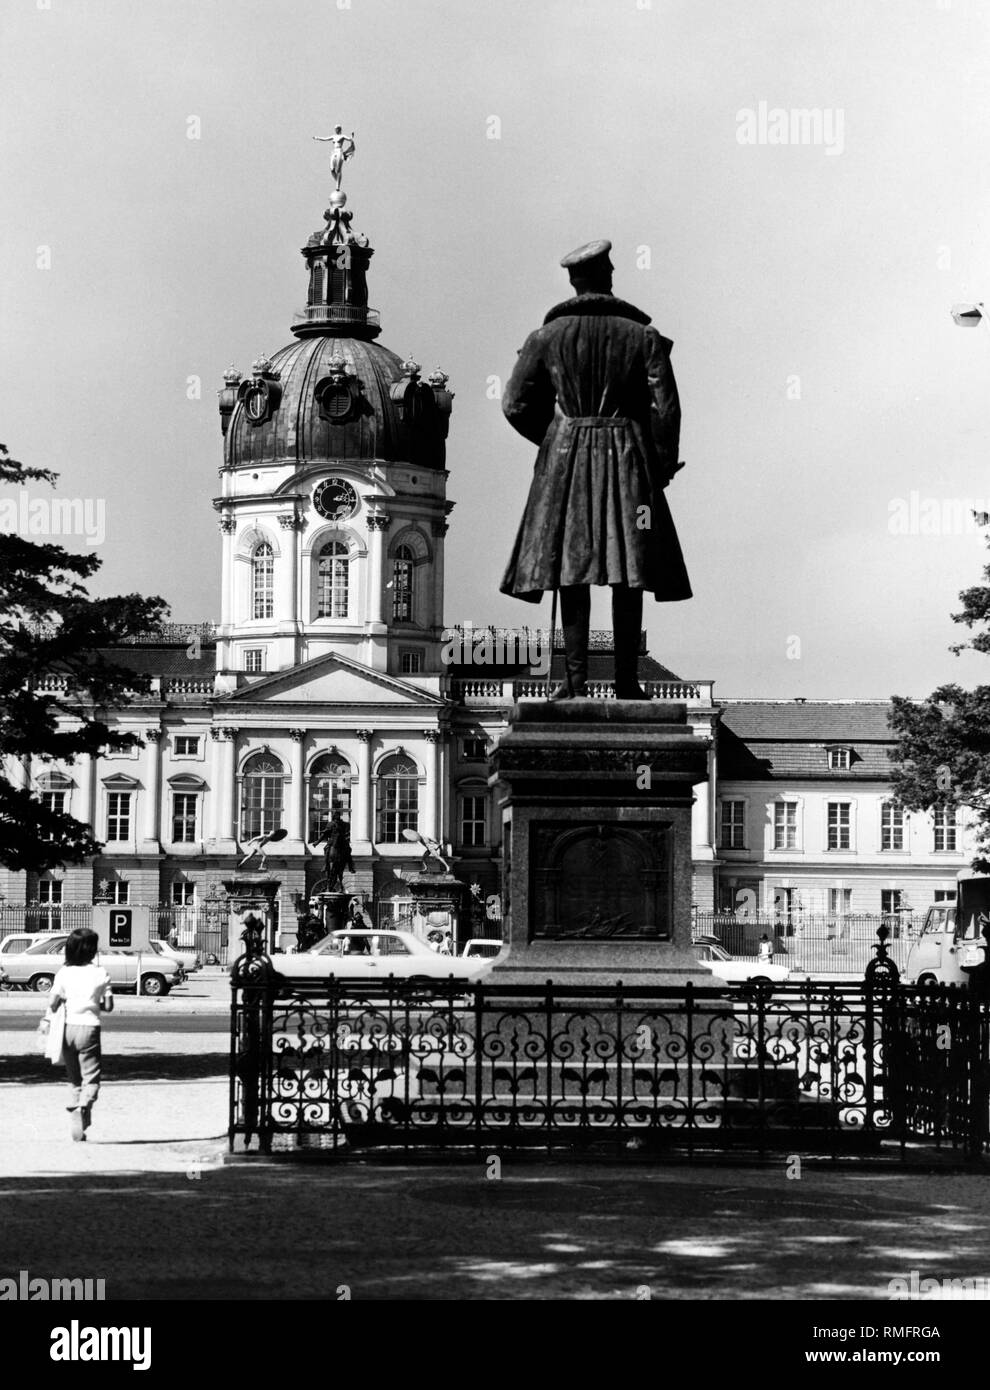 View of the portal of Charlottenburg Palace in West Berlin. In the foreground the statue of Prince Albrecht of Prussia by the sculptor Eugen Boermel. Stock Photo